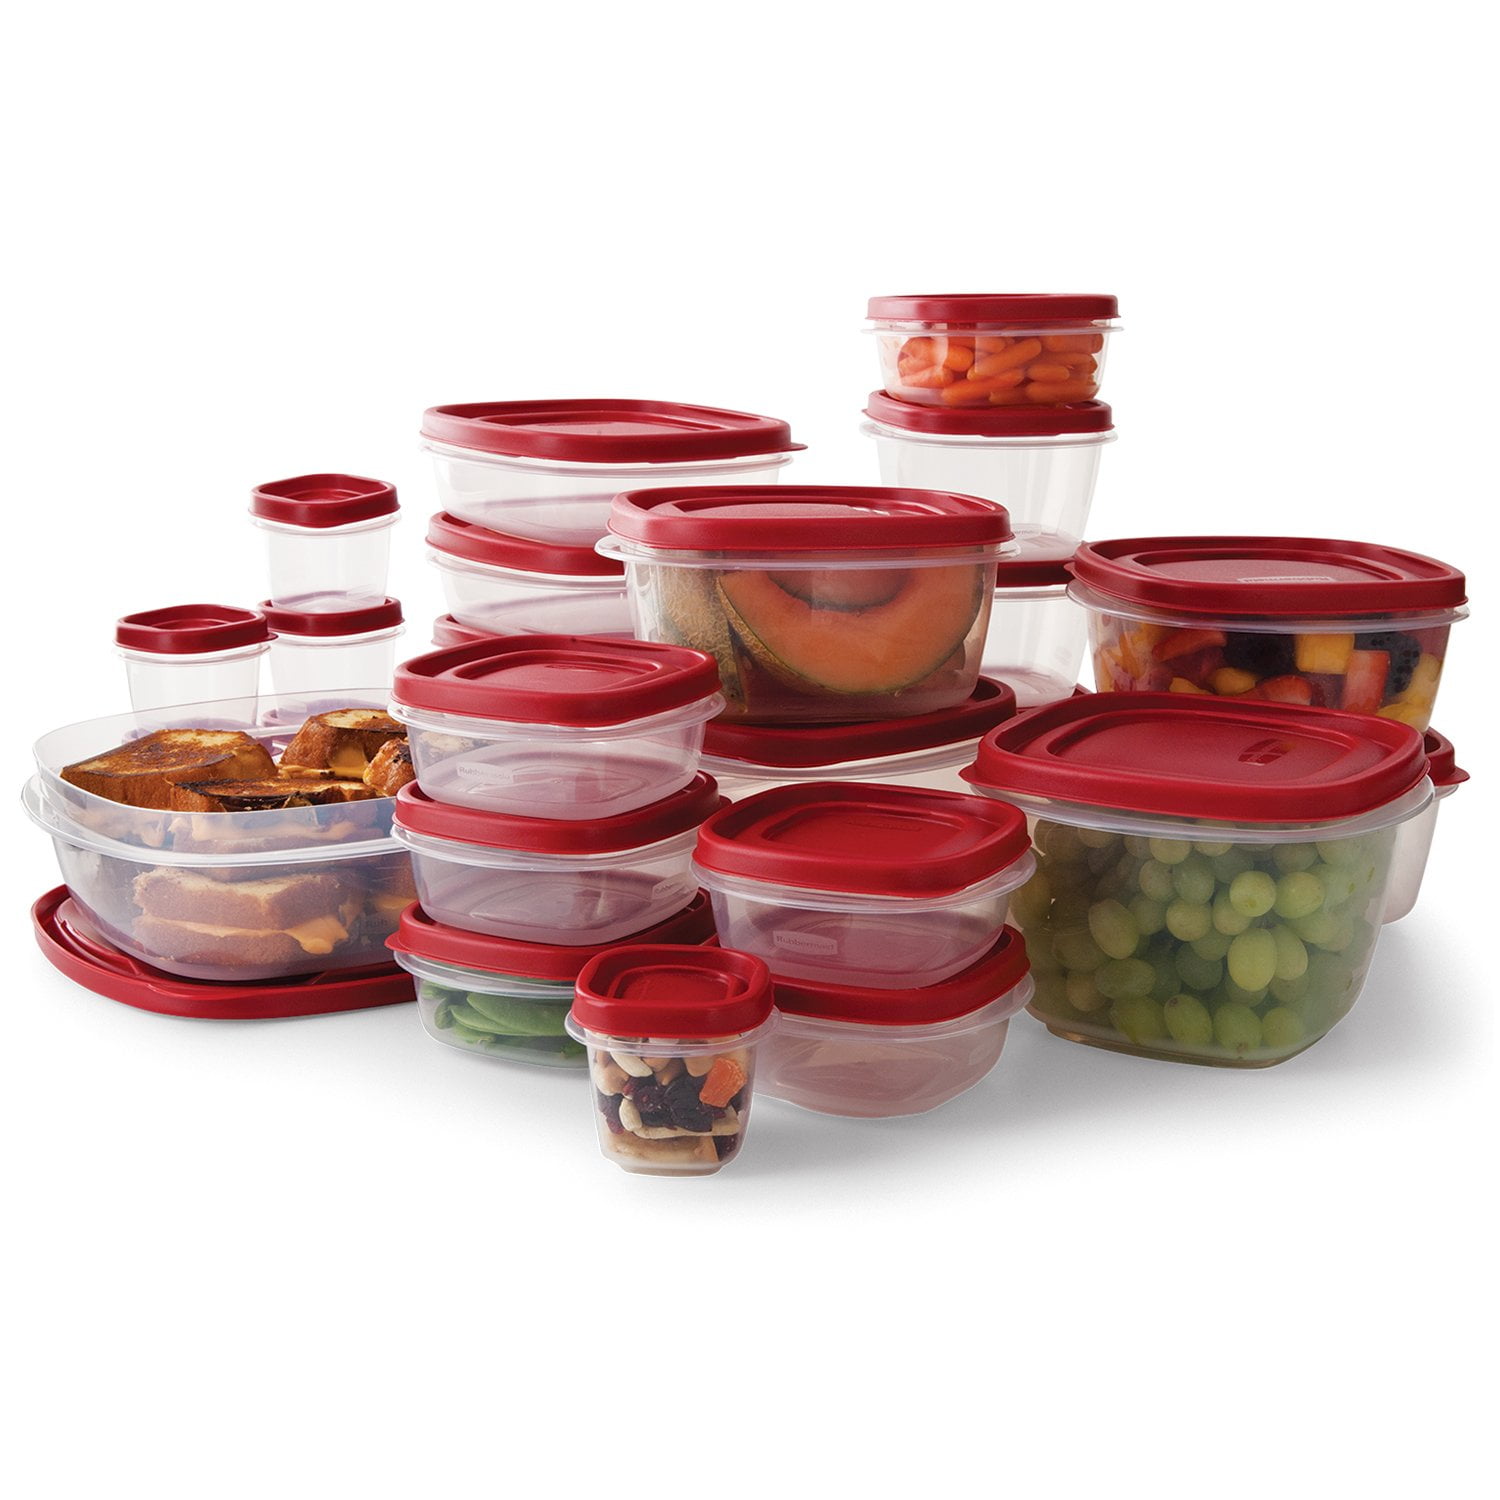 NIB Rubbermaid Take Alongs 50 Piece Food Storage containers Set Lids &  Bases